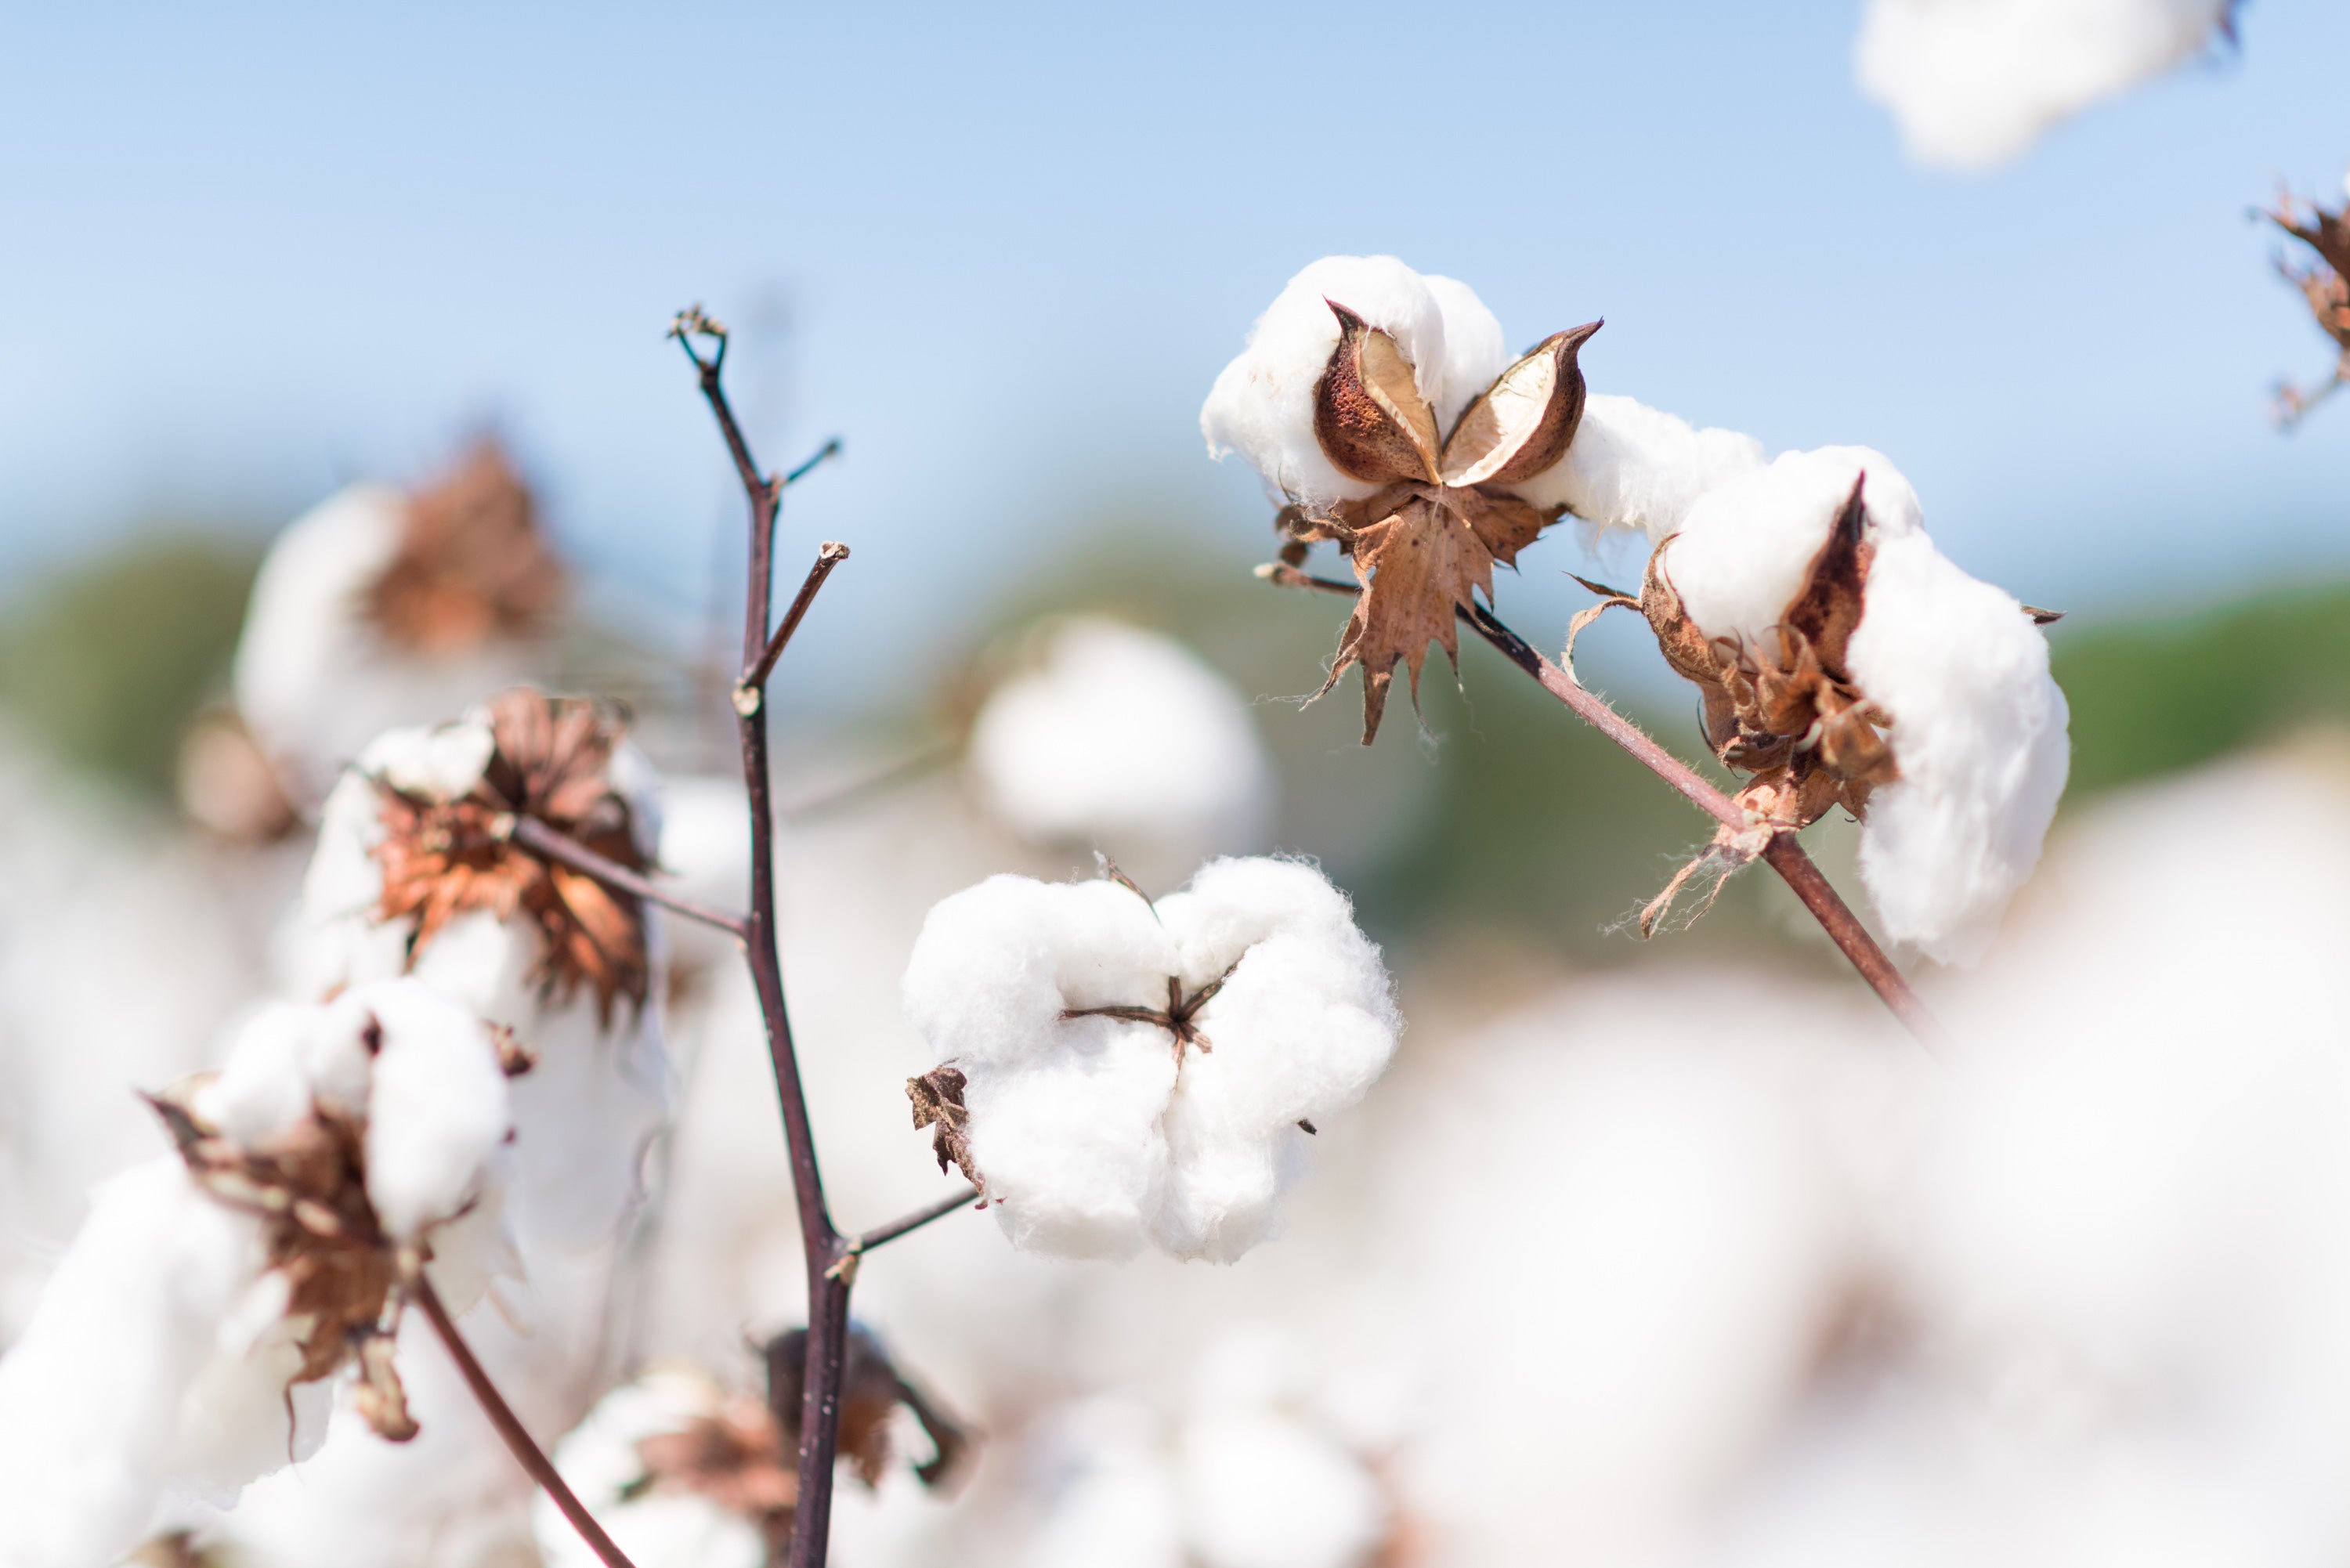 Organic cotton: what it is, uses, benefits and more